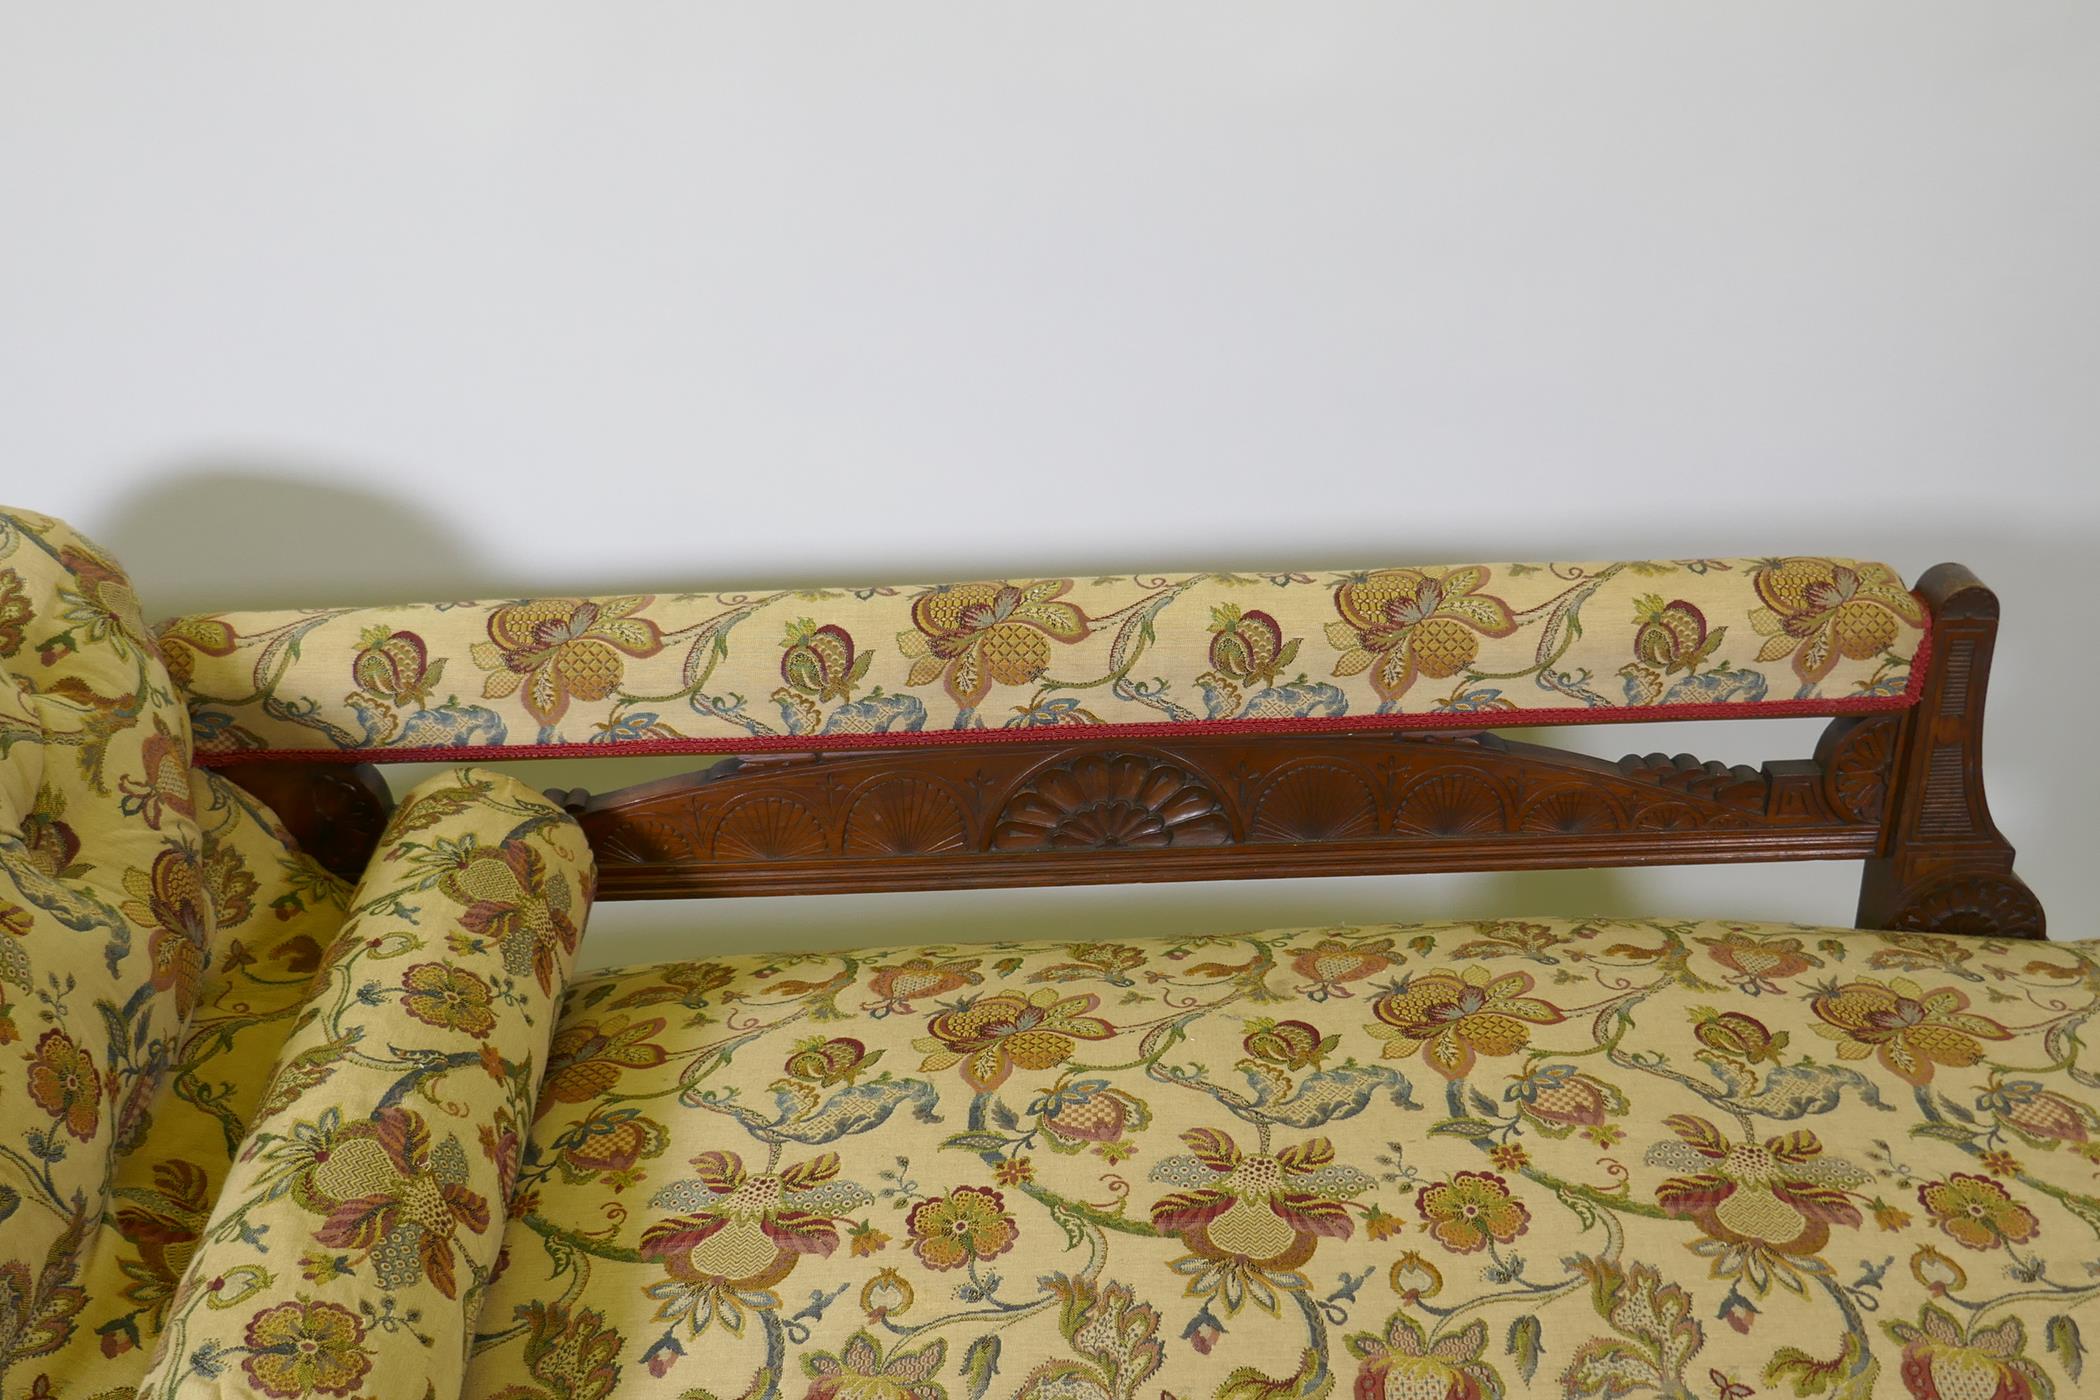 A Victorian walnut chaise longue with carved Grecian style decoration and good upholstery, 180cm - Image 4 of 4